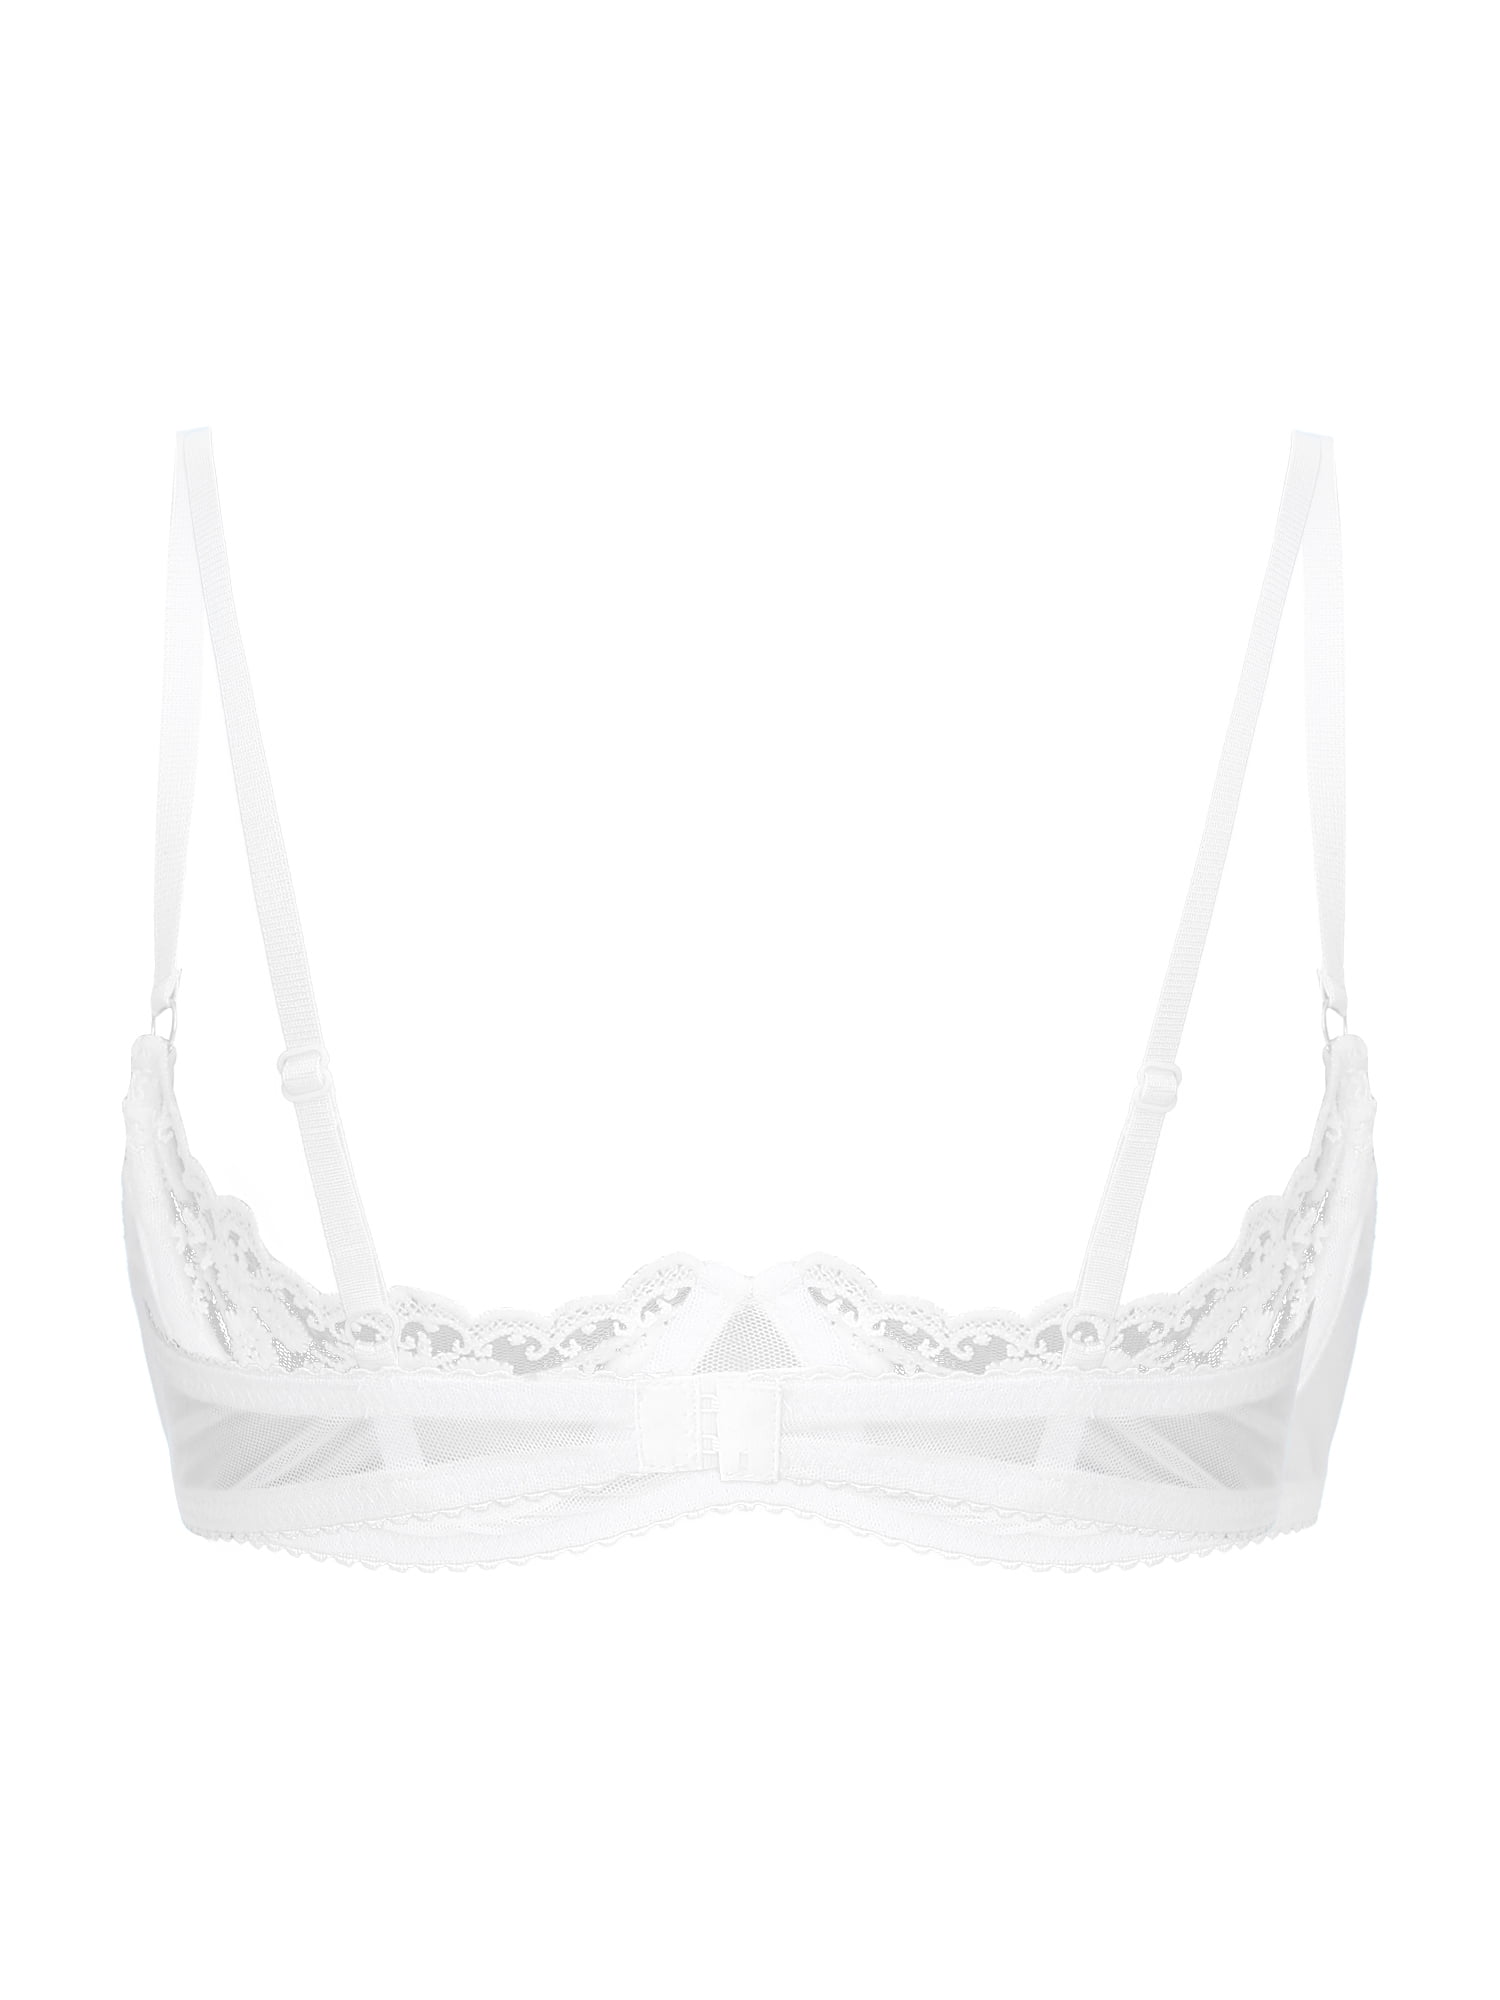 Aislor Womens Underwire Open Nipple Bra Sheer Lace Unlined Push Up Cupless  Shelf Bras Size S-5XL White XL